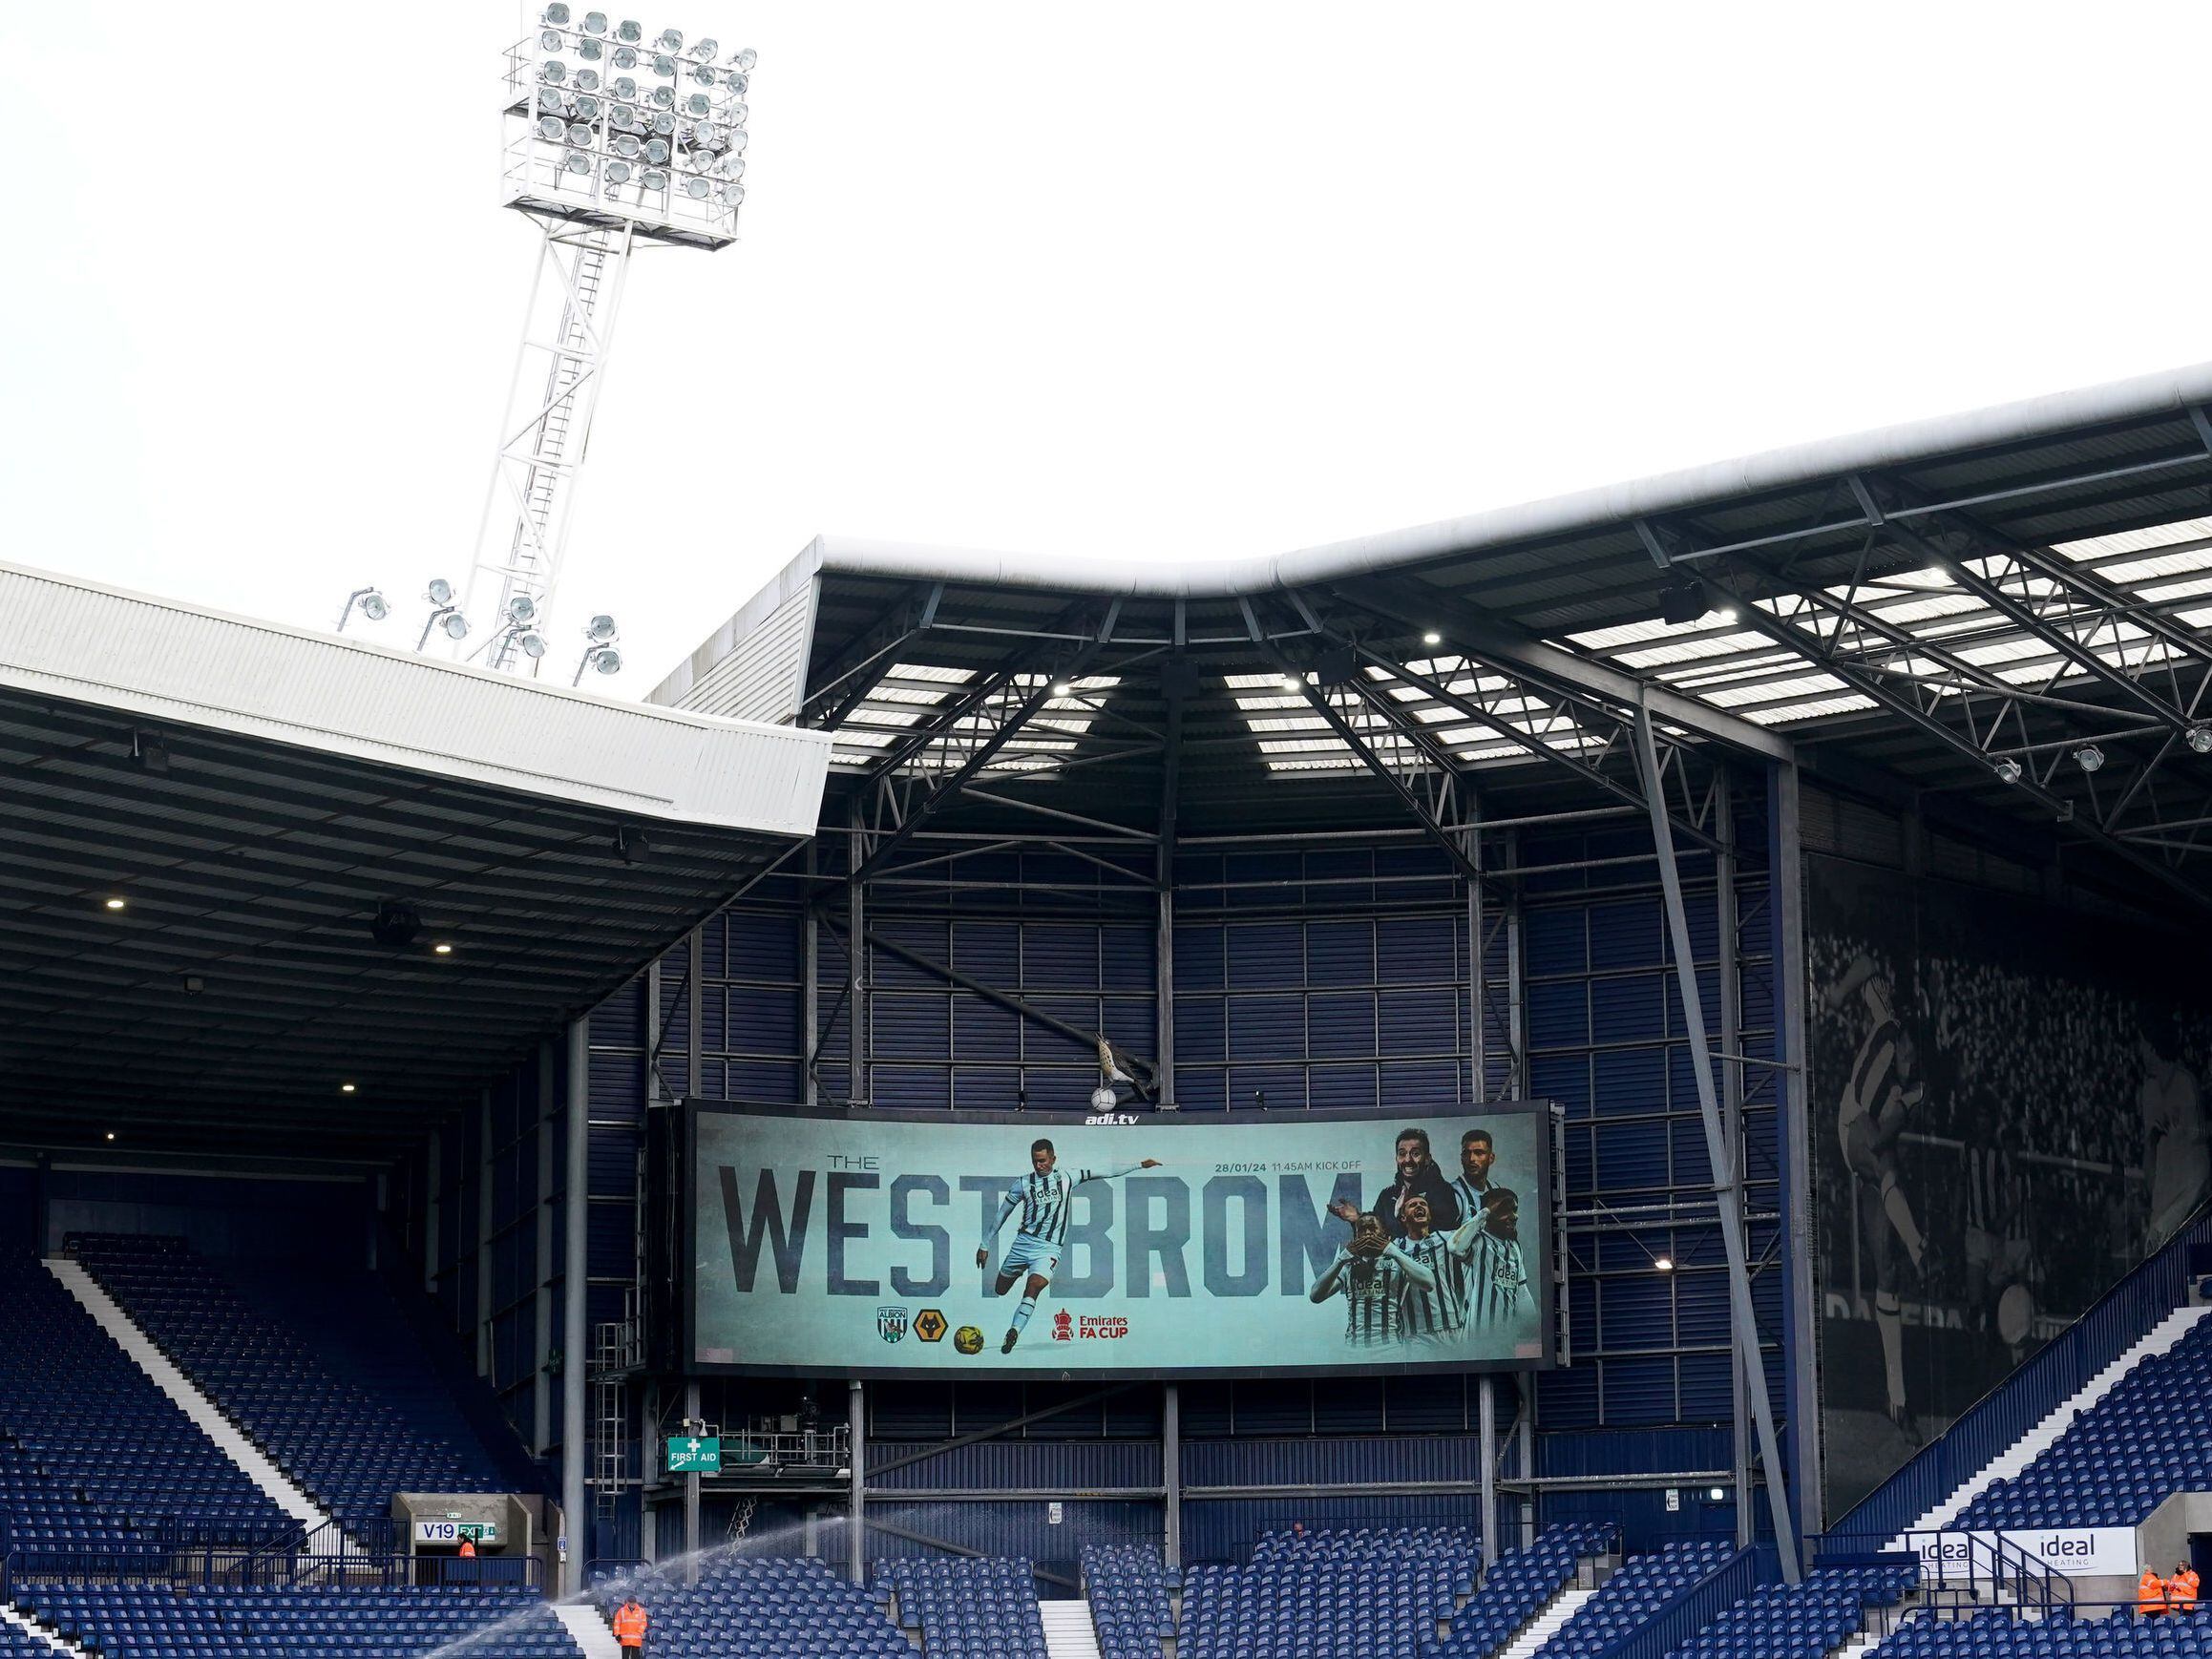 Exclusive: Significant update as West Brom takeover edges closer